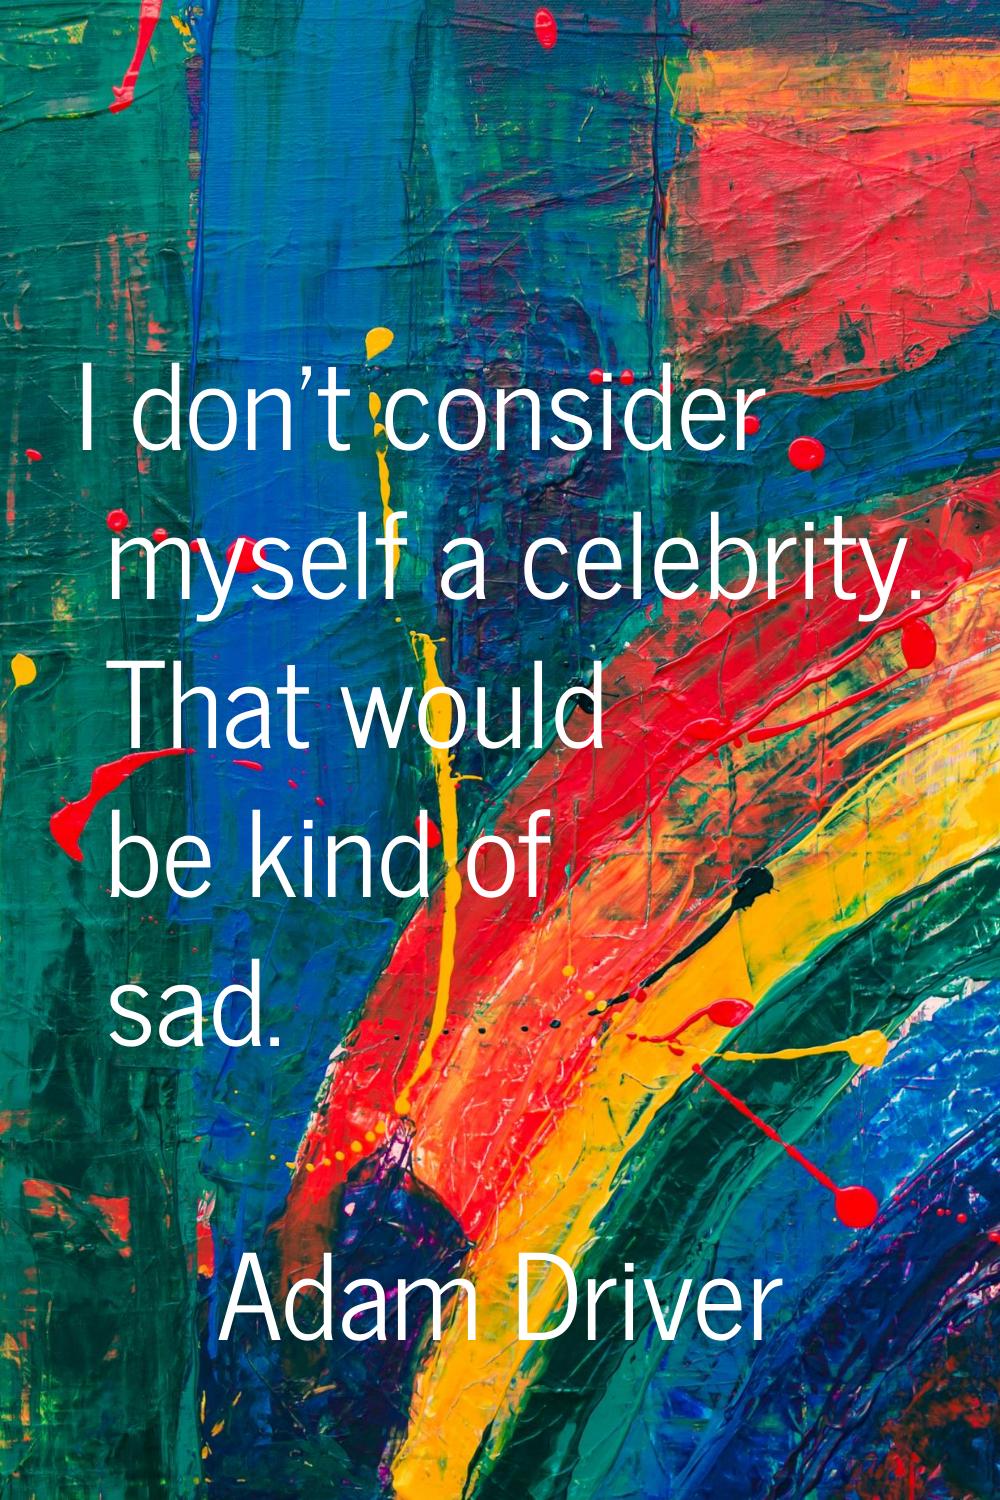 I don't consider myself a celebrity. That would be kind of sad.